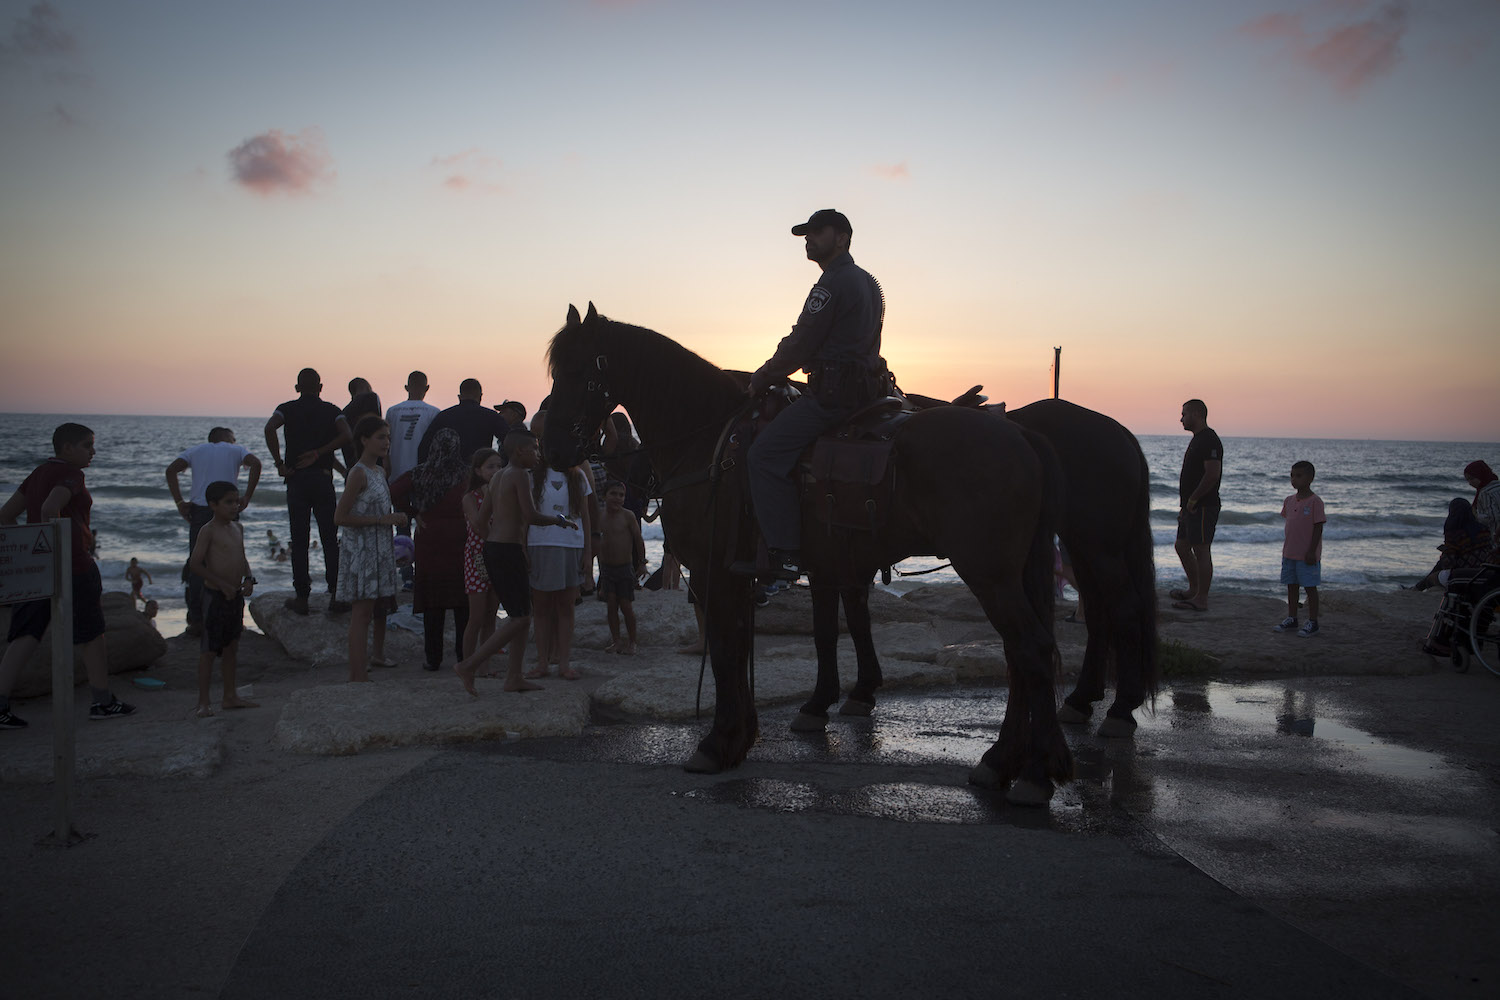 A mounted Israeli policeman looks on as Palestinians enjoy an evening on the beach on the border of Tel Aviv and Jaffa during the second day of Eid al-Fitr, July 7, 2016. (Oren Ziv)